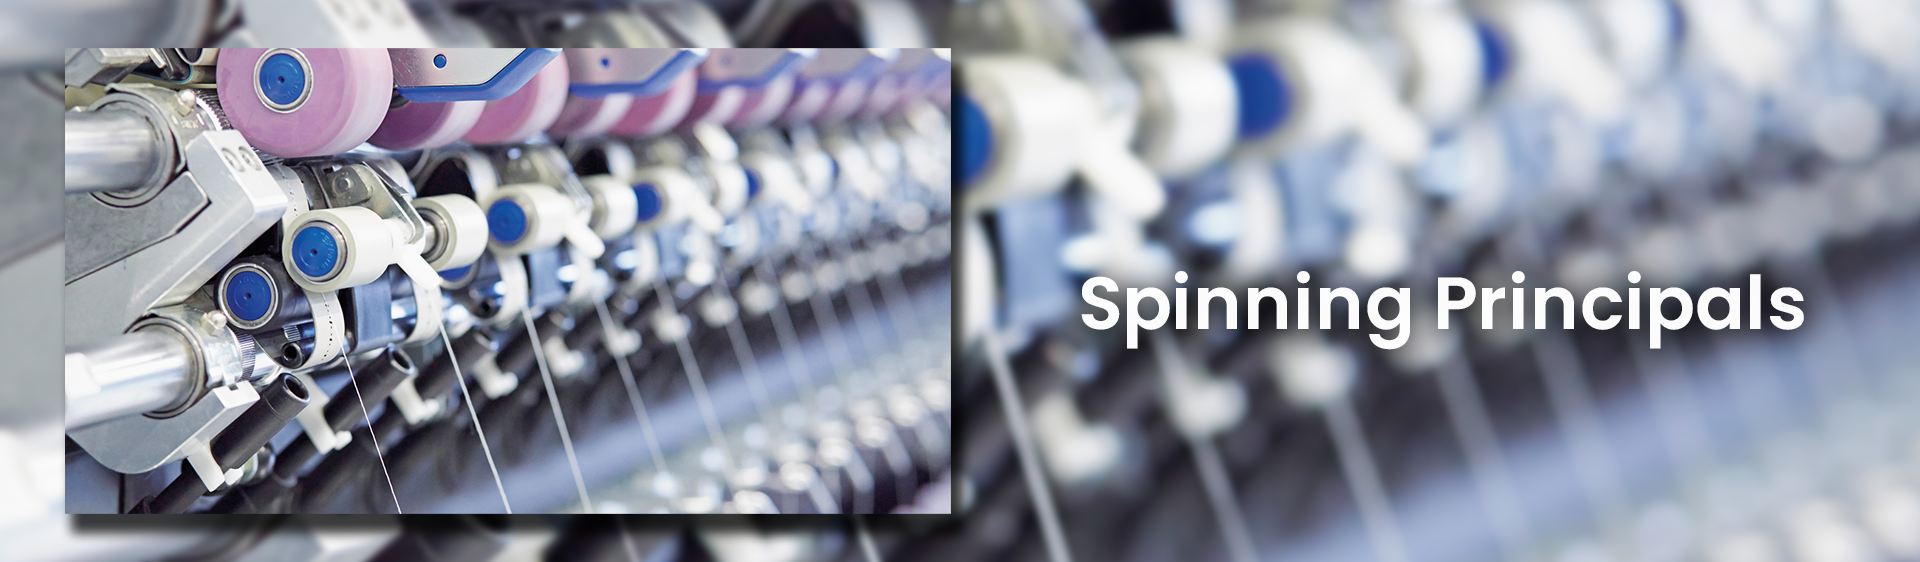 textile spinning machines | Piotex textile company 